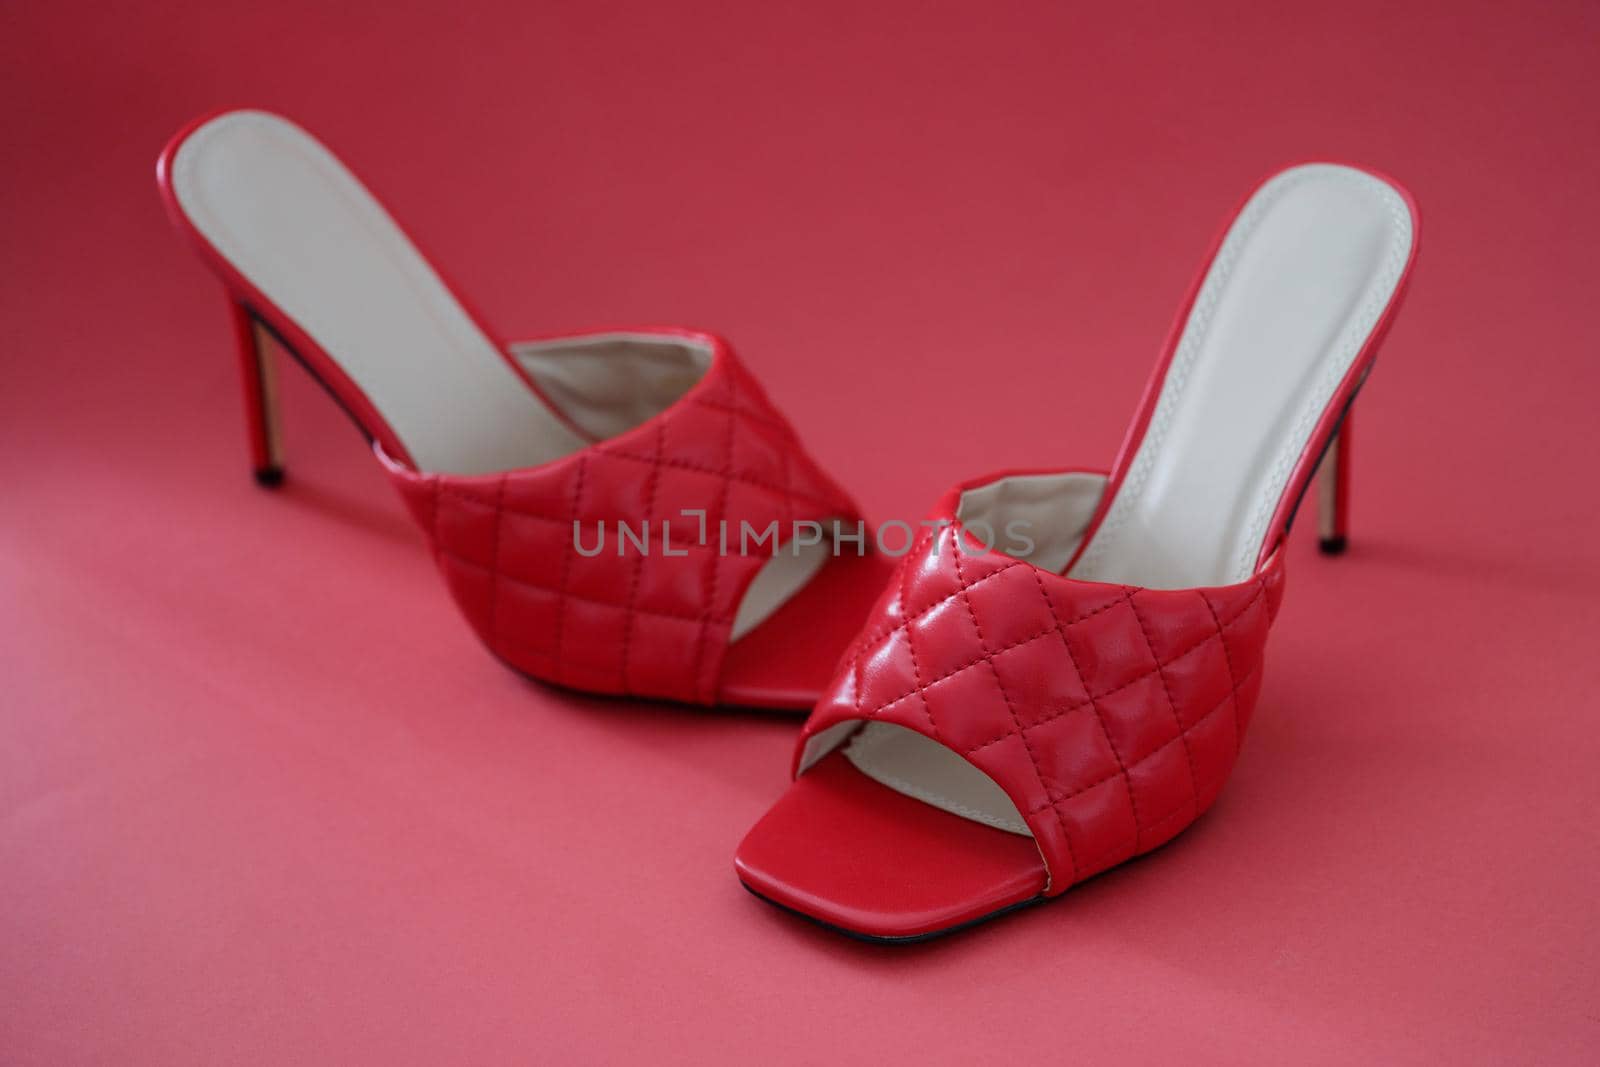 Red leather female sandals with heels on red background. Summer shoes concept